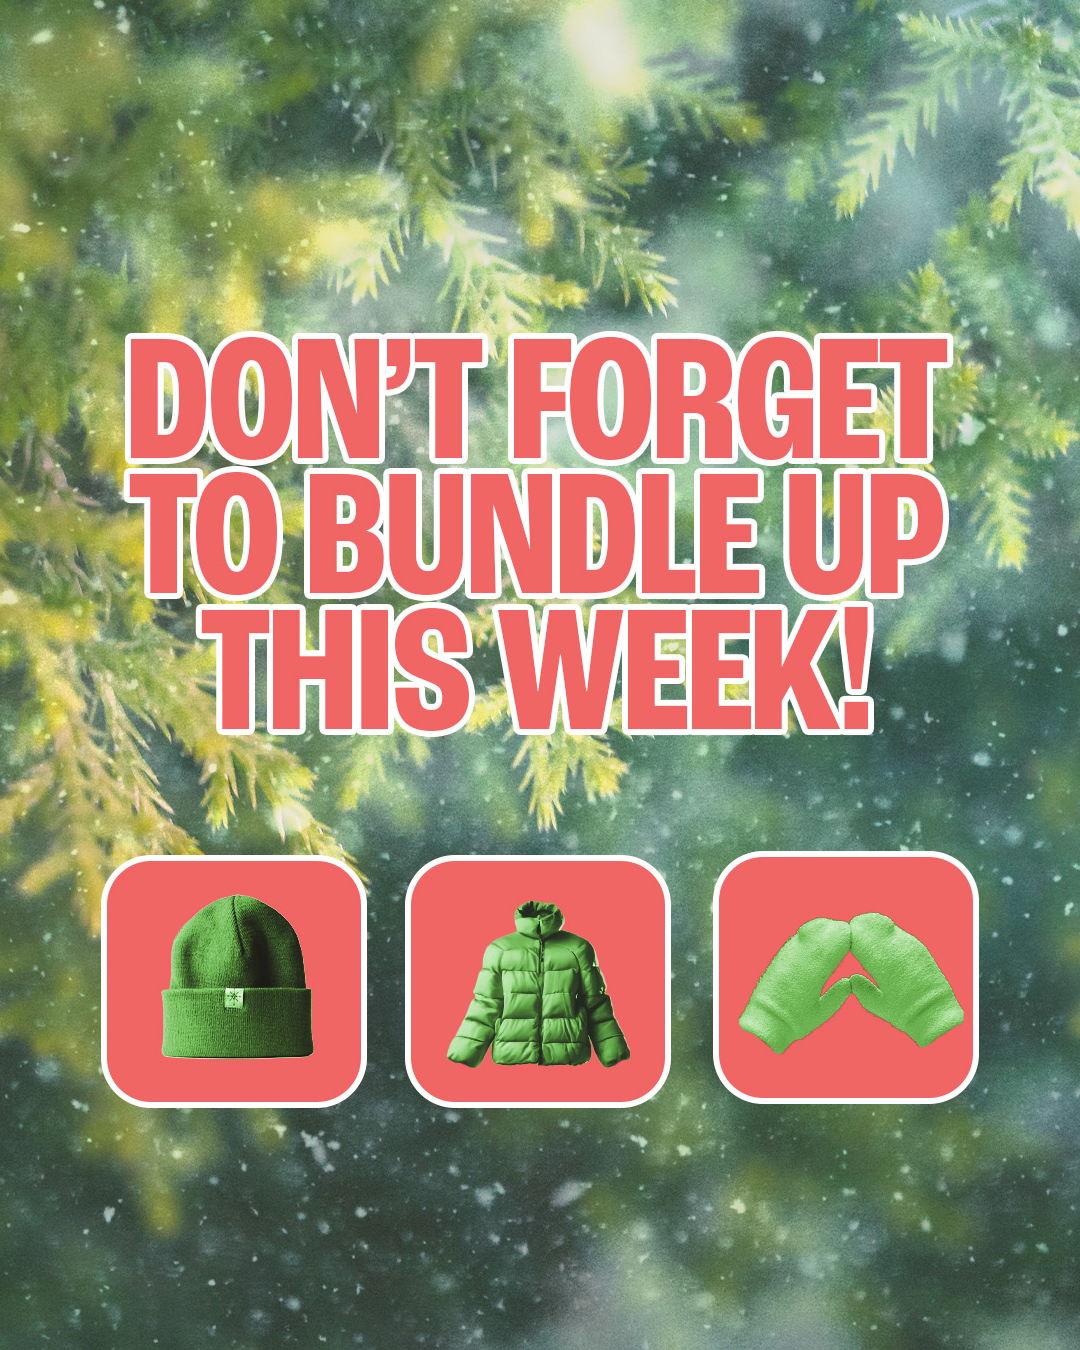 Don’t forget to bundle up this week!